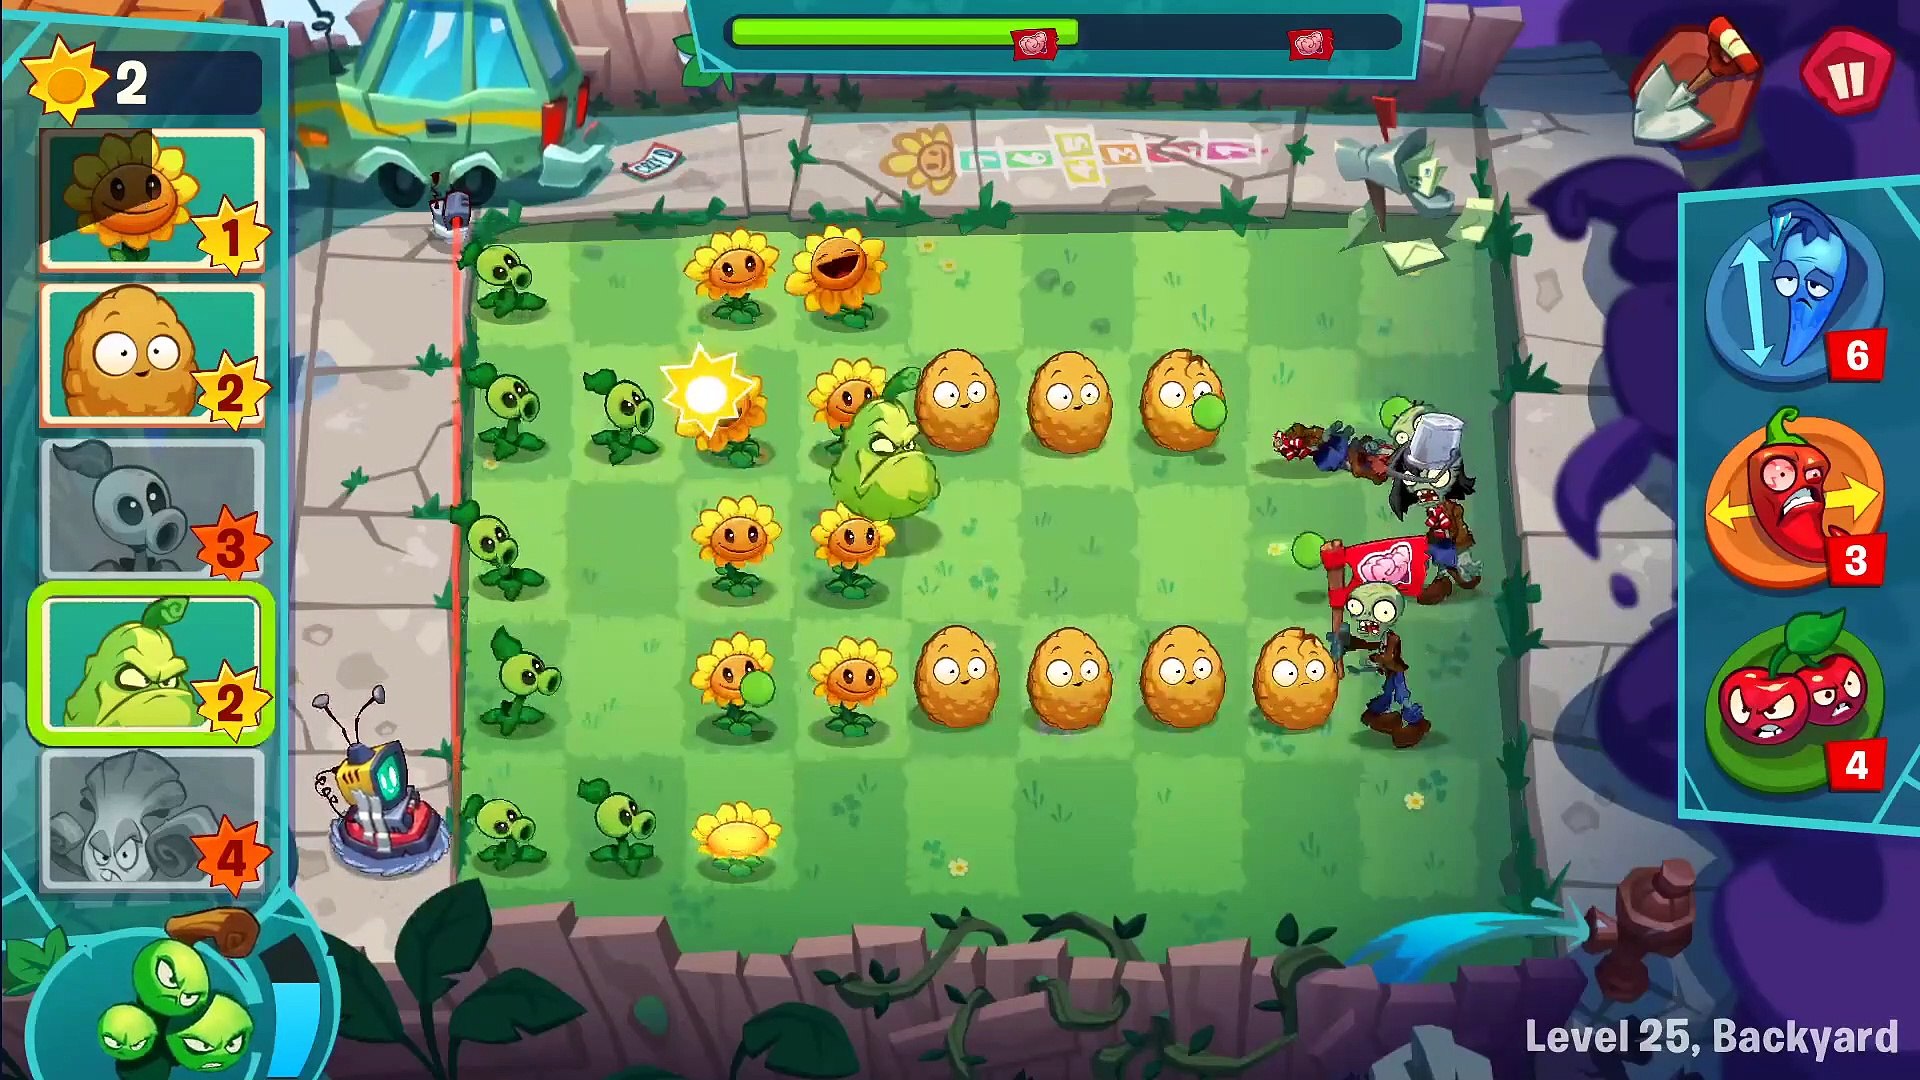 Plants vs Zombies 3 Beta 2022 - ROOF IS BACK - Levels 39-42 